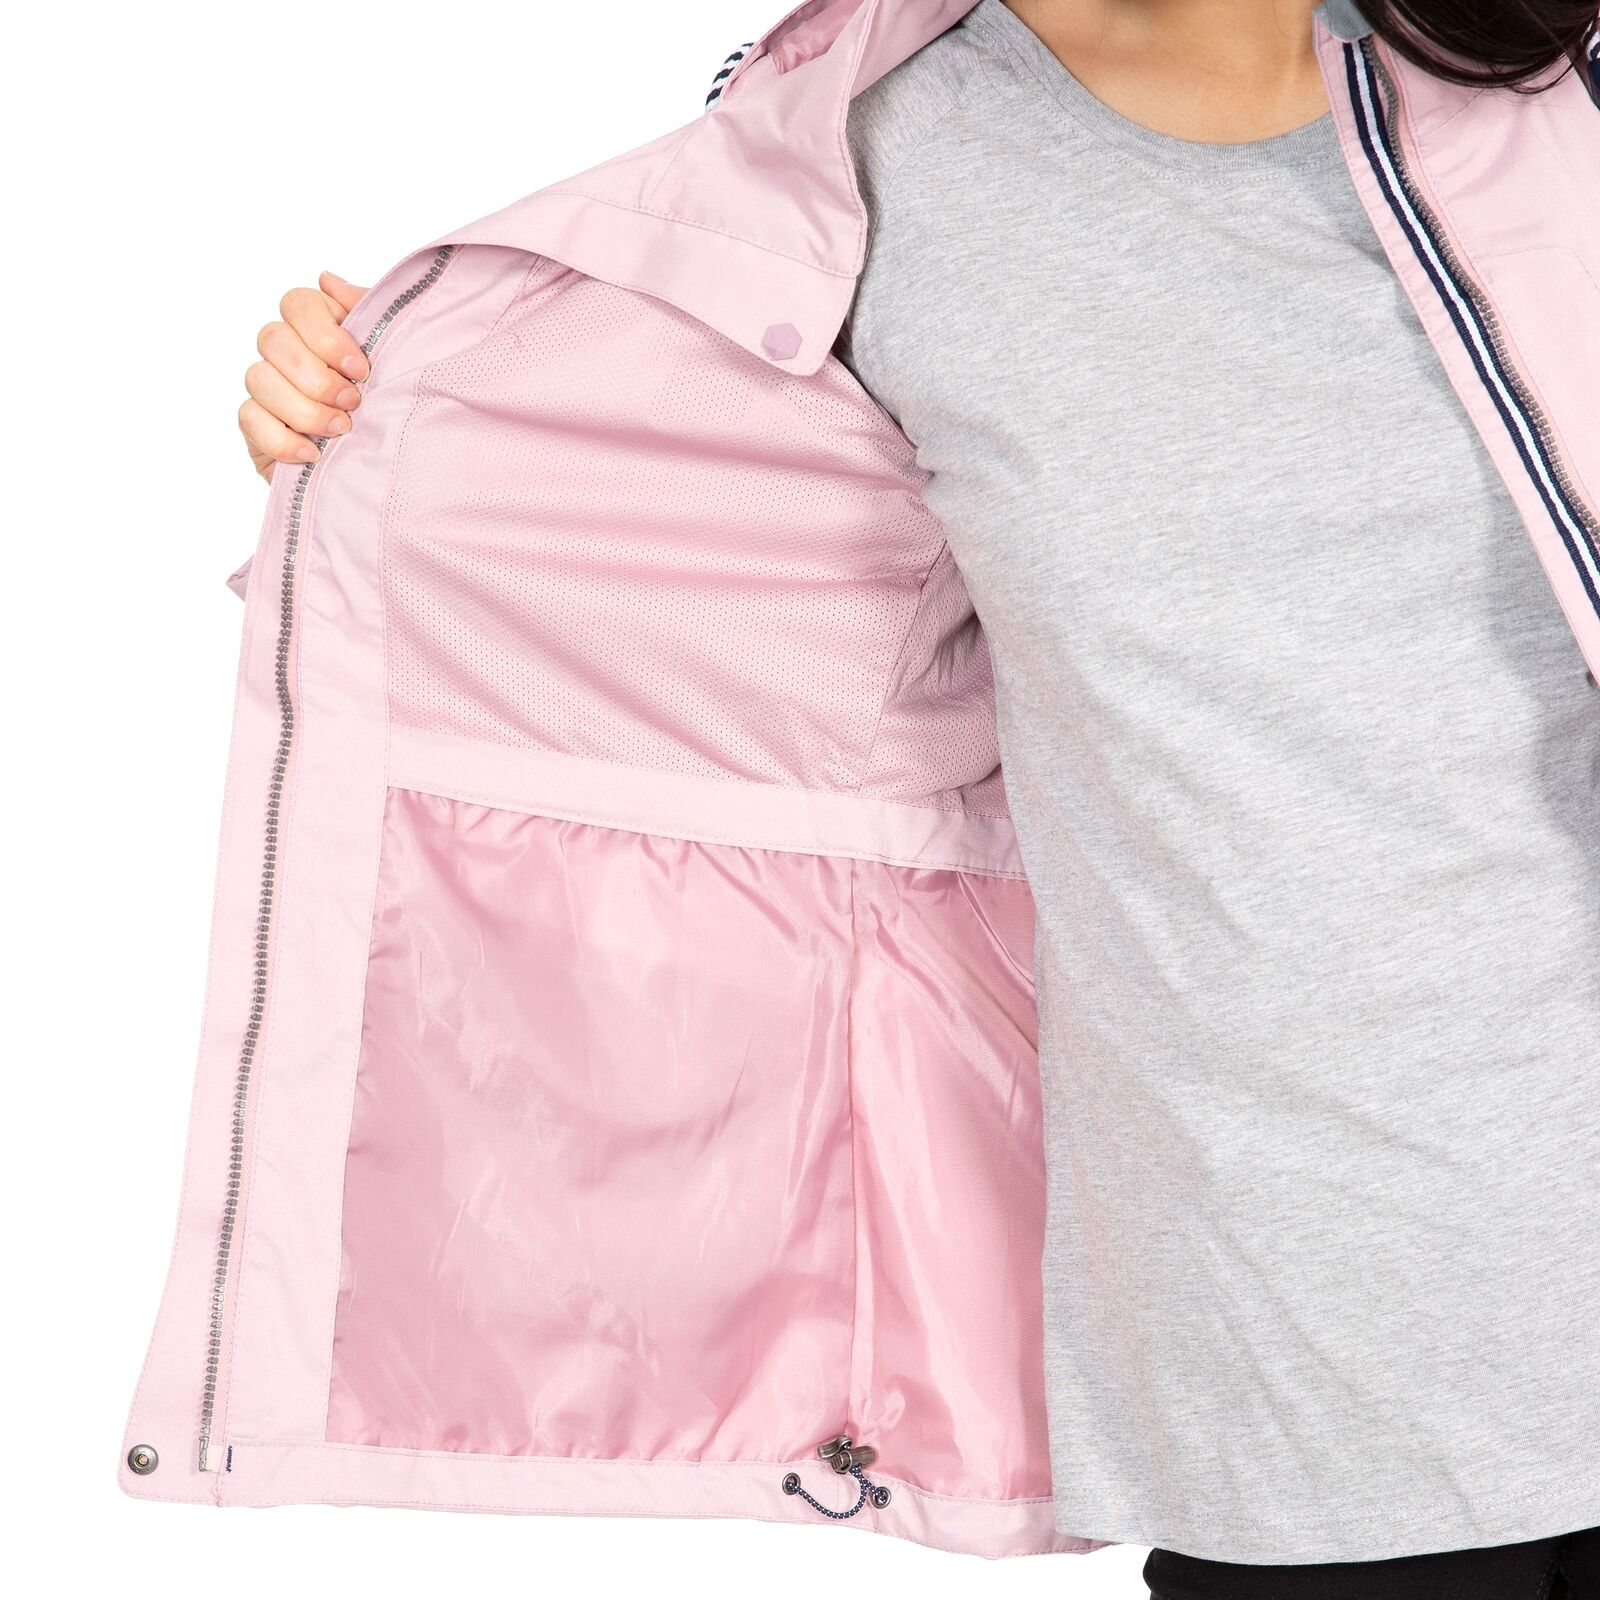 Material: 100% Polyester. Fabric: Taffeta. Design: Logo, Plain. Adjustable Hem, Breathable, Storm Flap, Wind Resistant. Fabric Technology: Tres-Tex Membrane. Cuff: Adjustable. Neckline: High-Neck. Sleeve-Type: Long-Sleeved. Hood Features: Concealed, Drawstring. Pockets: 2 Envelope Pockets, 1 Chest Pocket. Fastening: Full Zip.